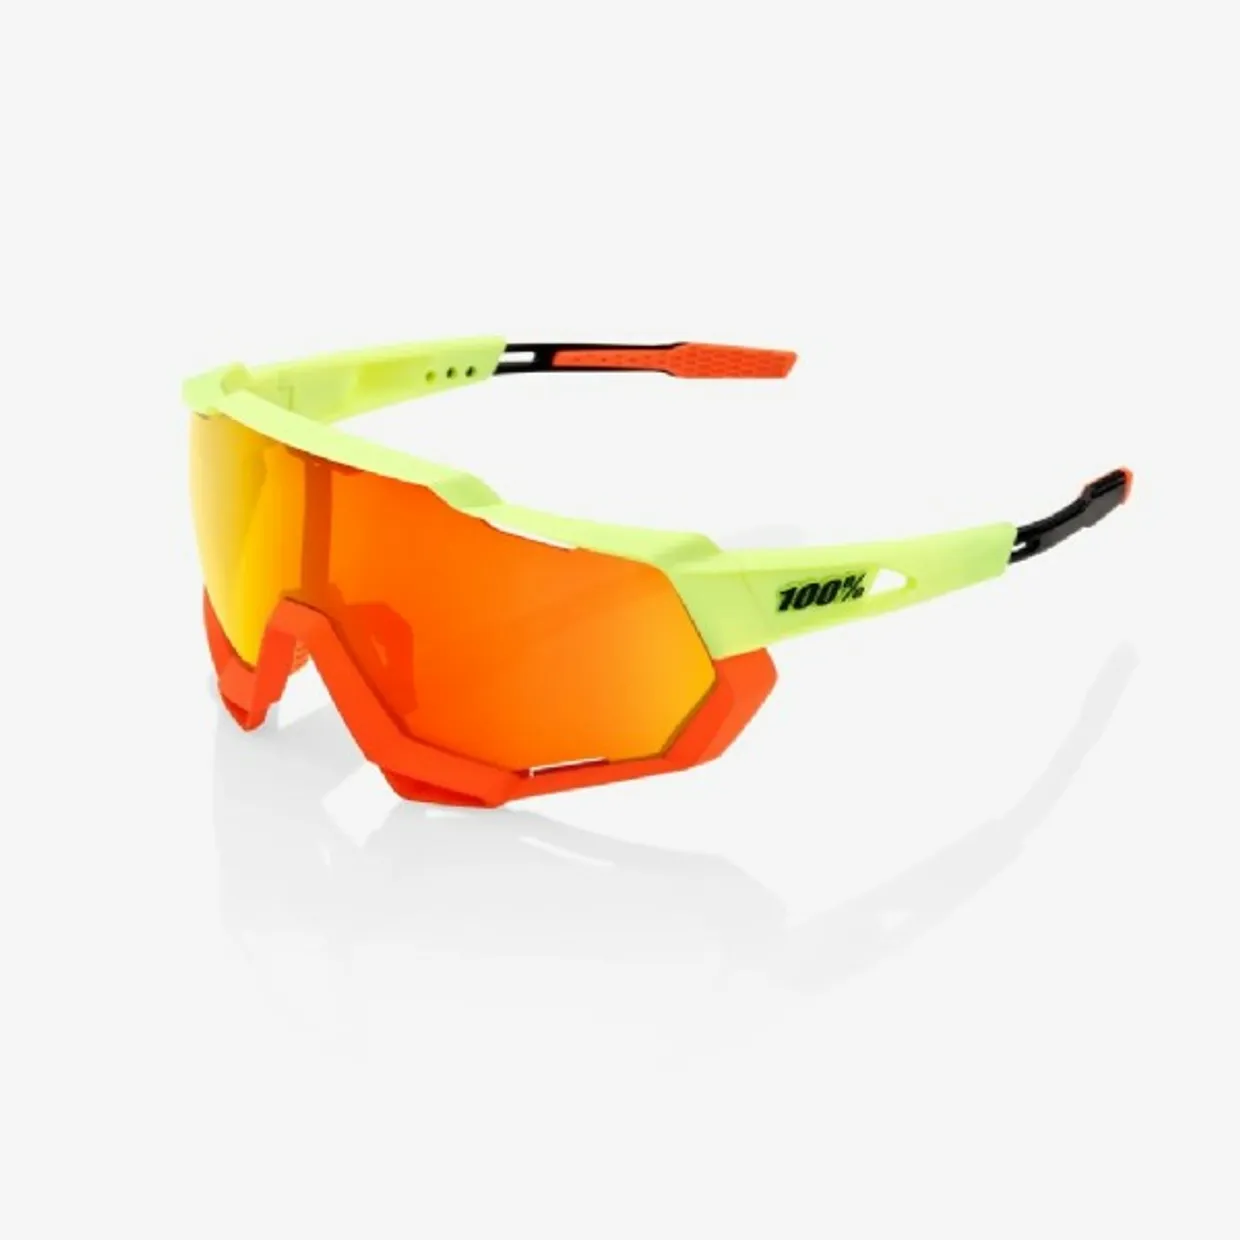 Speedtrap Soft Oxyfire/ Hiper Red Multilayer Mirror & Clear lens